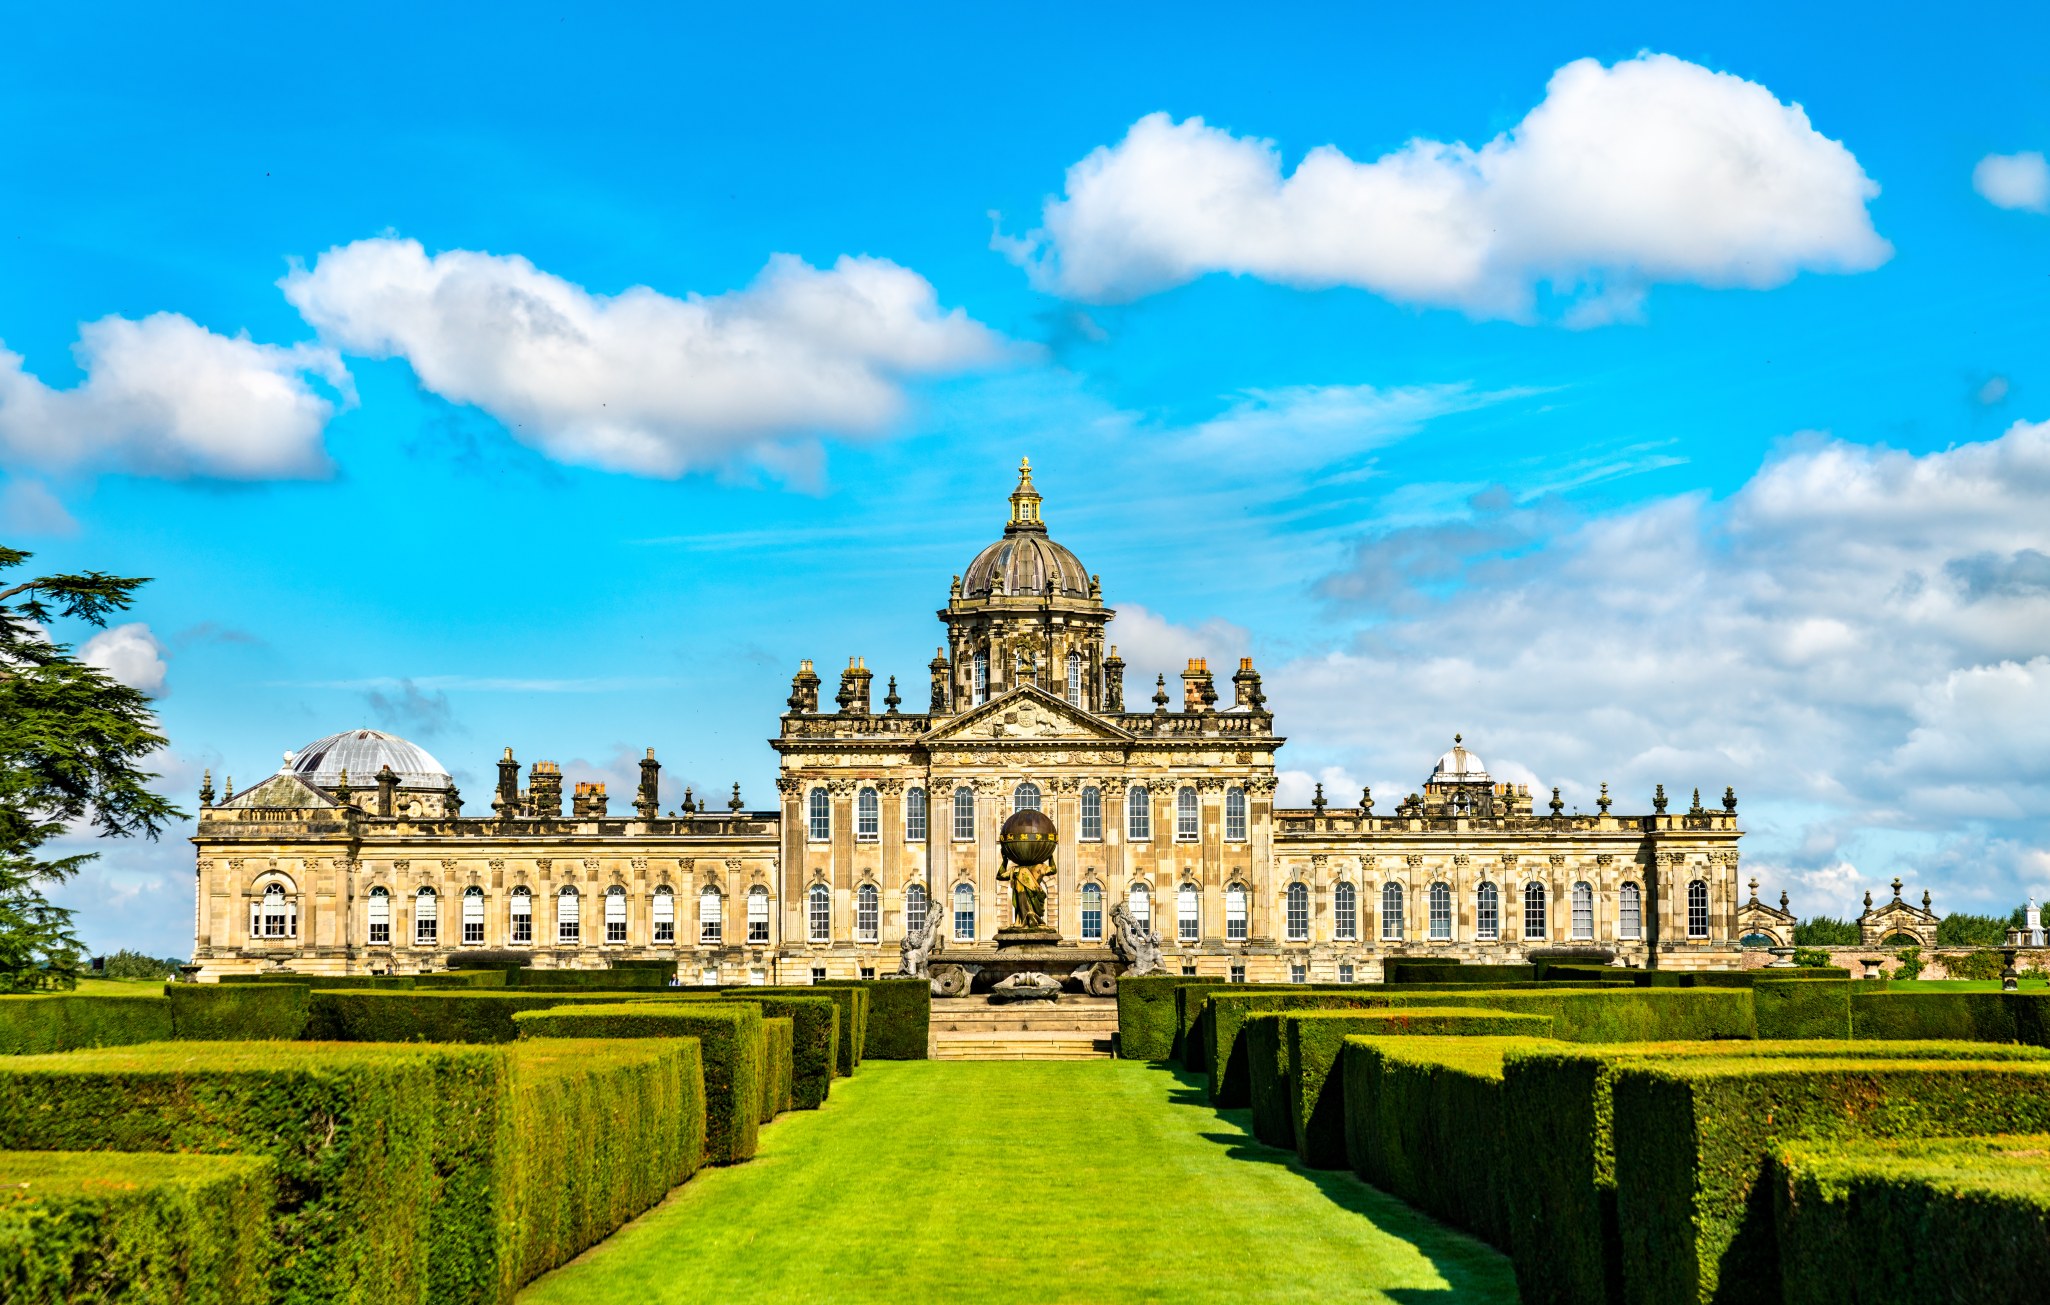 Grade I listed Castle Howard in North Yorkshire